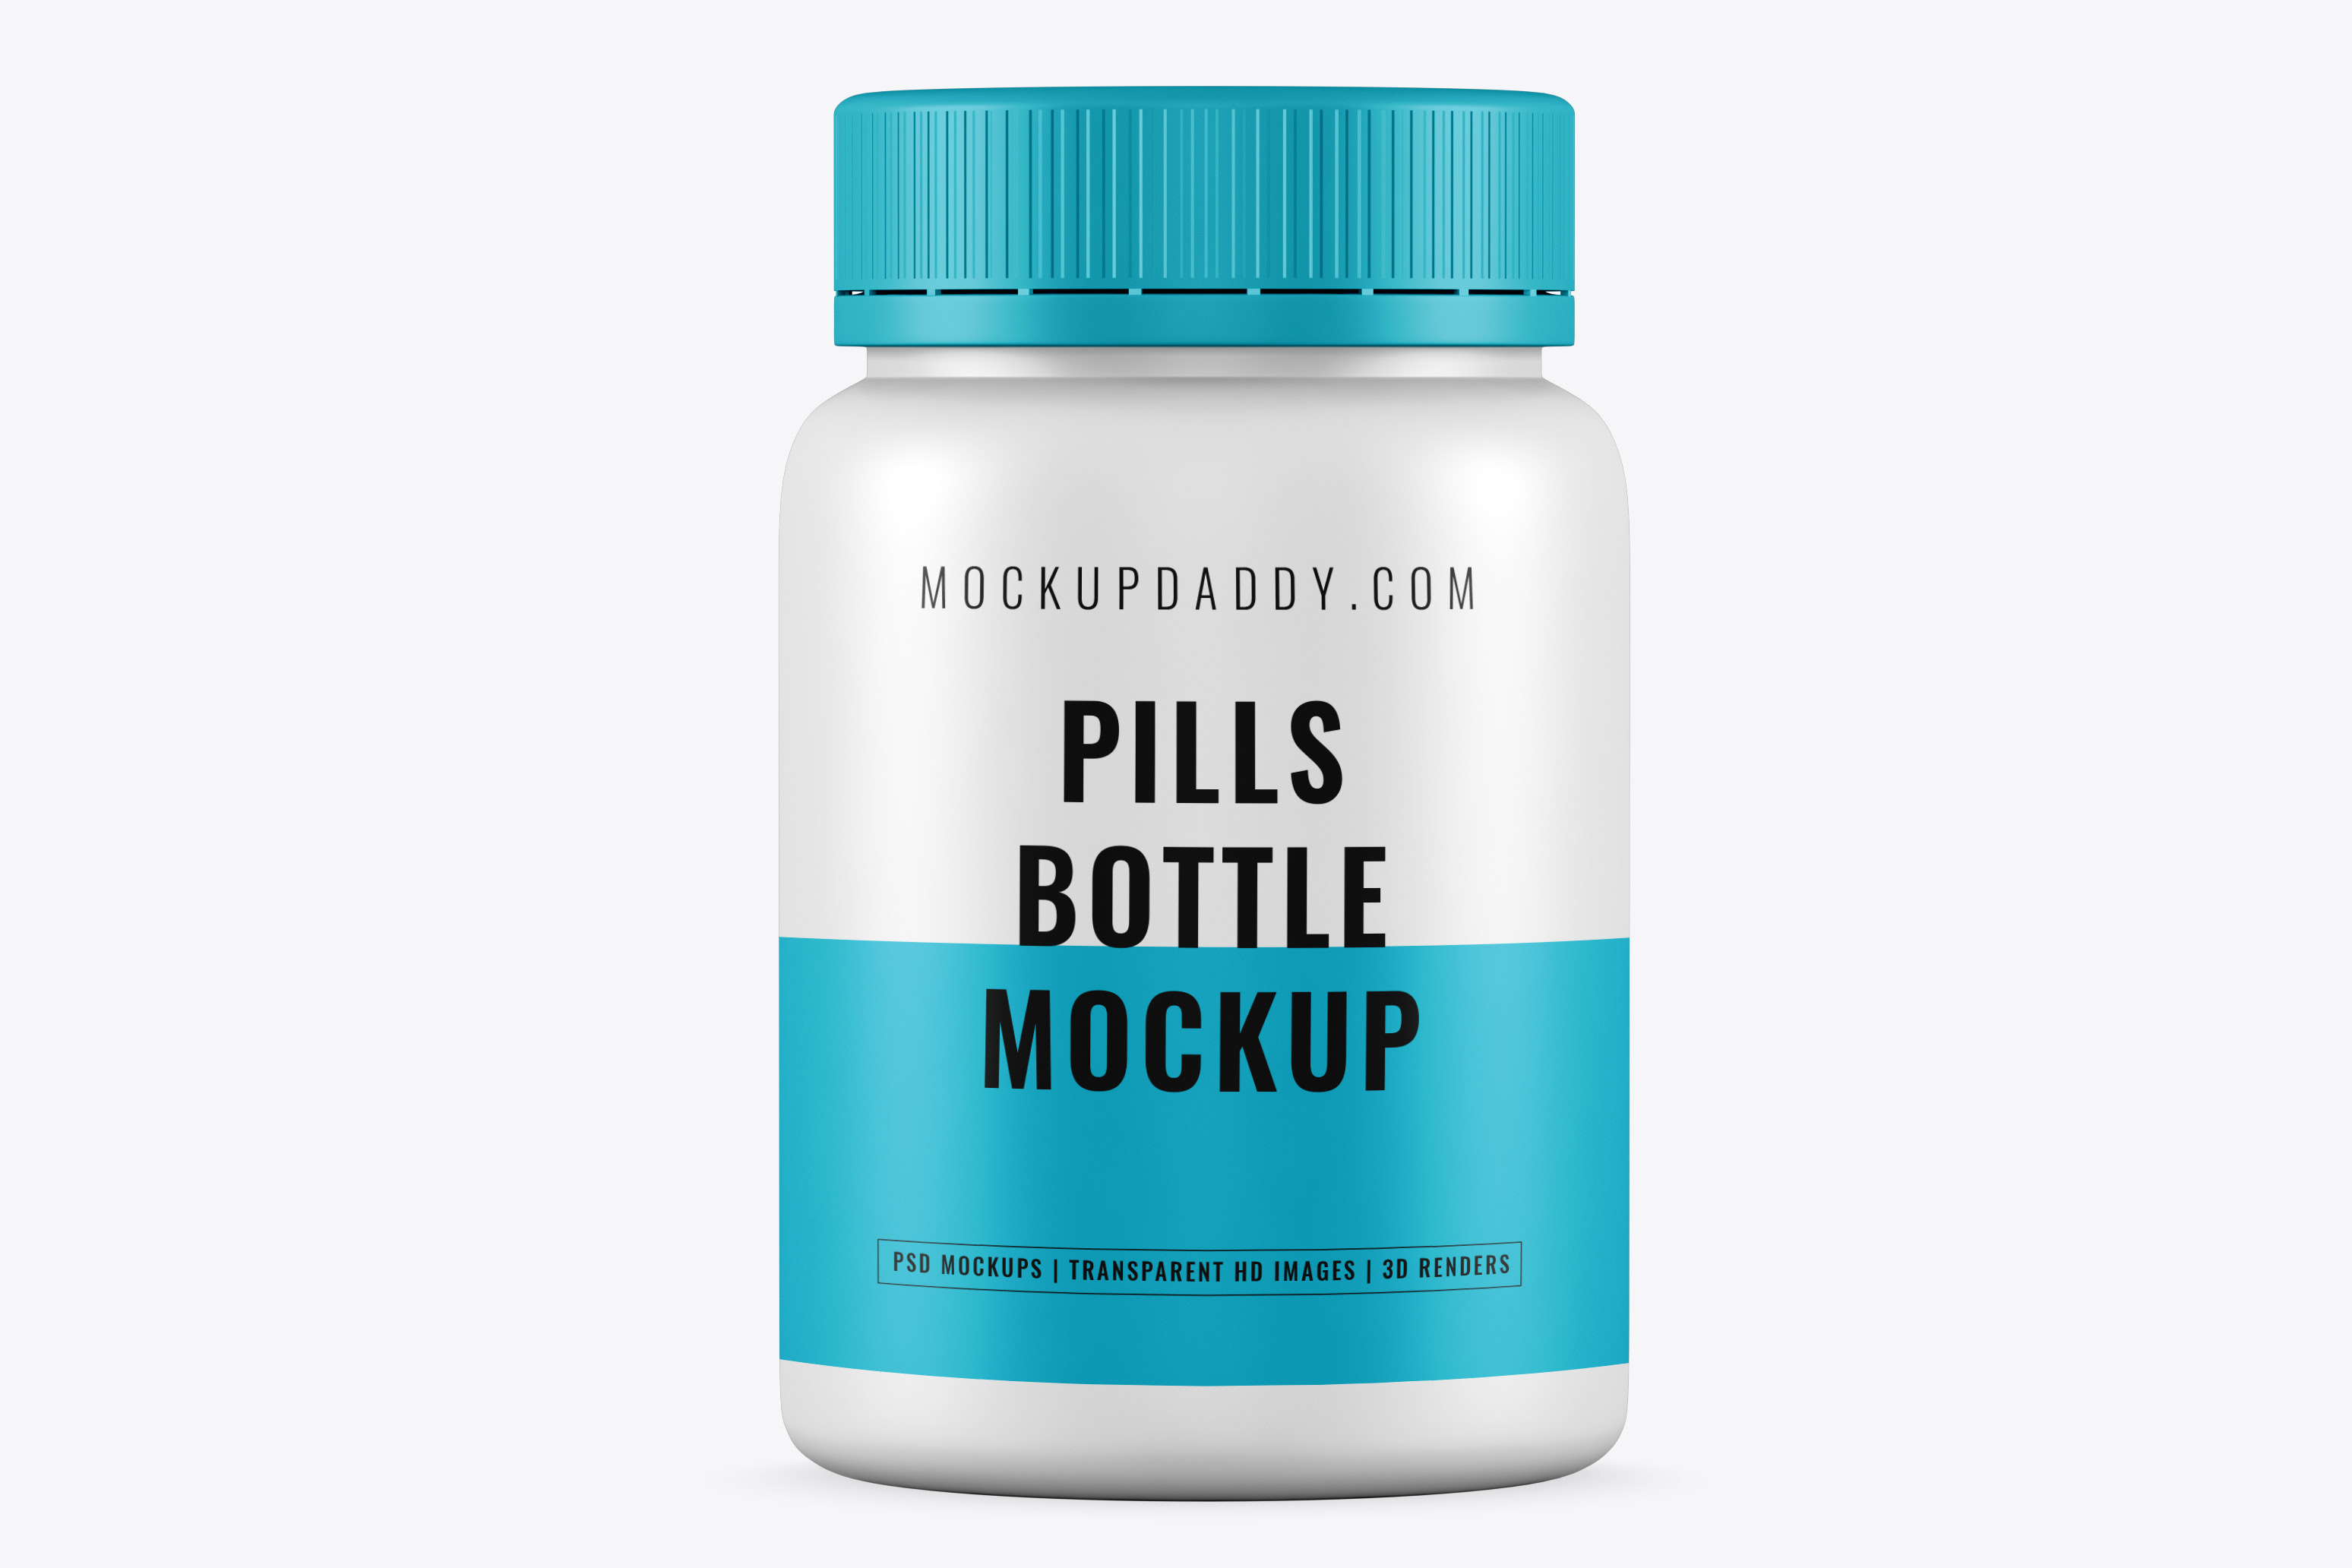 Small Pills Bottle Psd Mockup Free Download Mockup Daddy